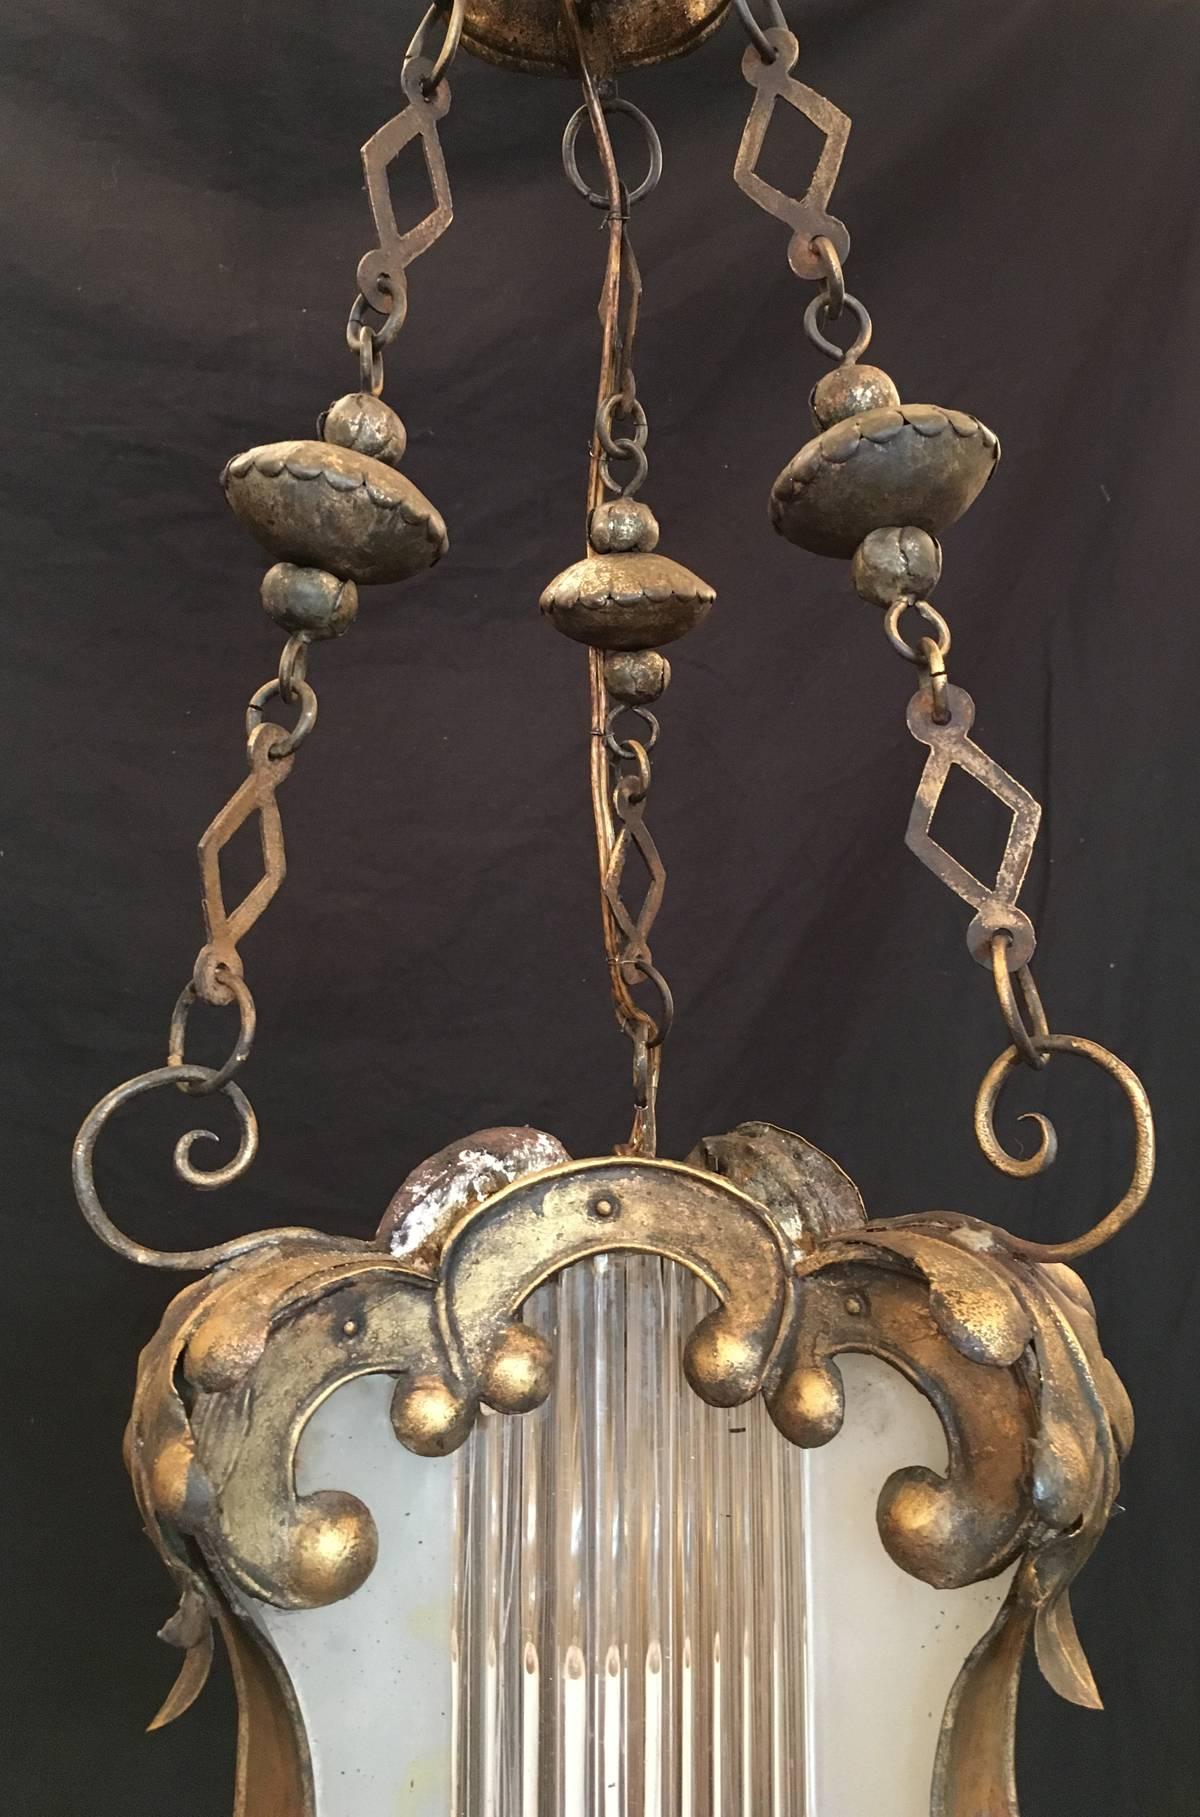 This Baroque lantern was made in Venice, Italy, during the 18th century, circa 1760, and features a gilded tole body covered in scrolls and floral design. The frosted glass center contains Venetian blown glass rods and was originally candle. It has